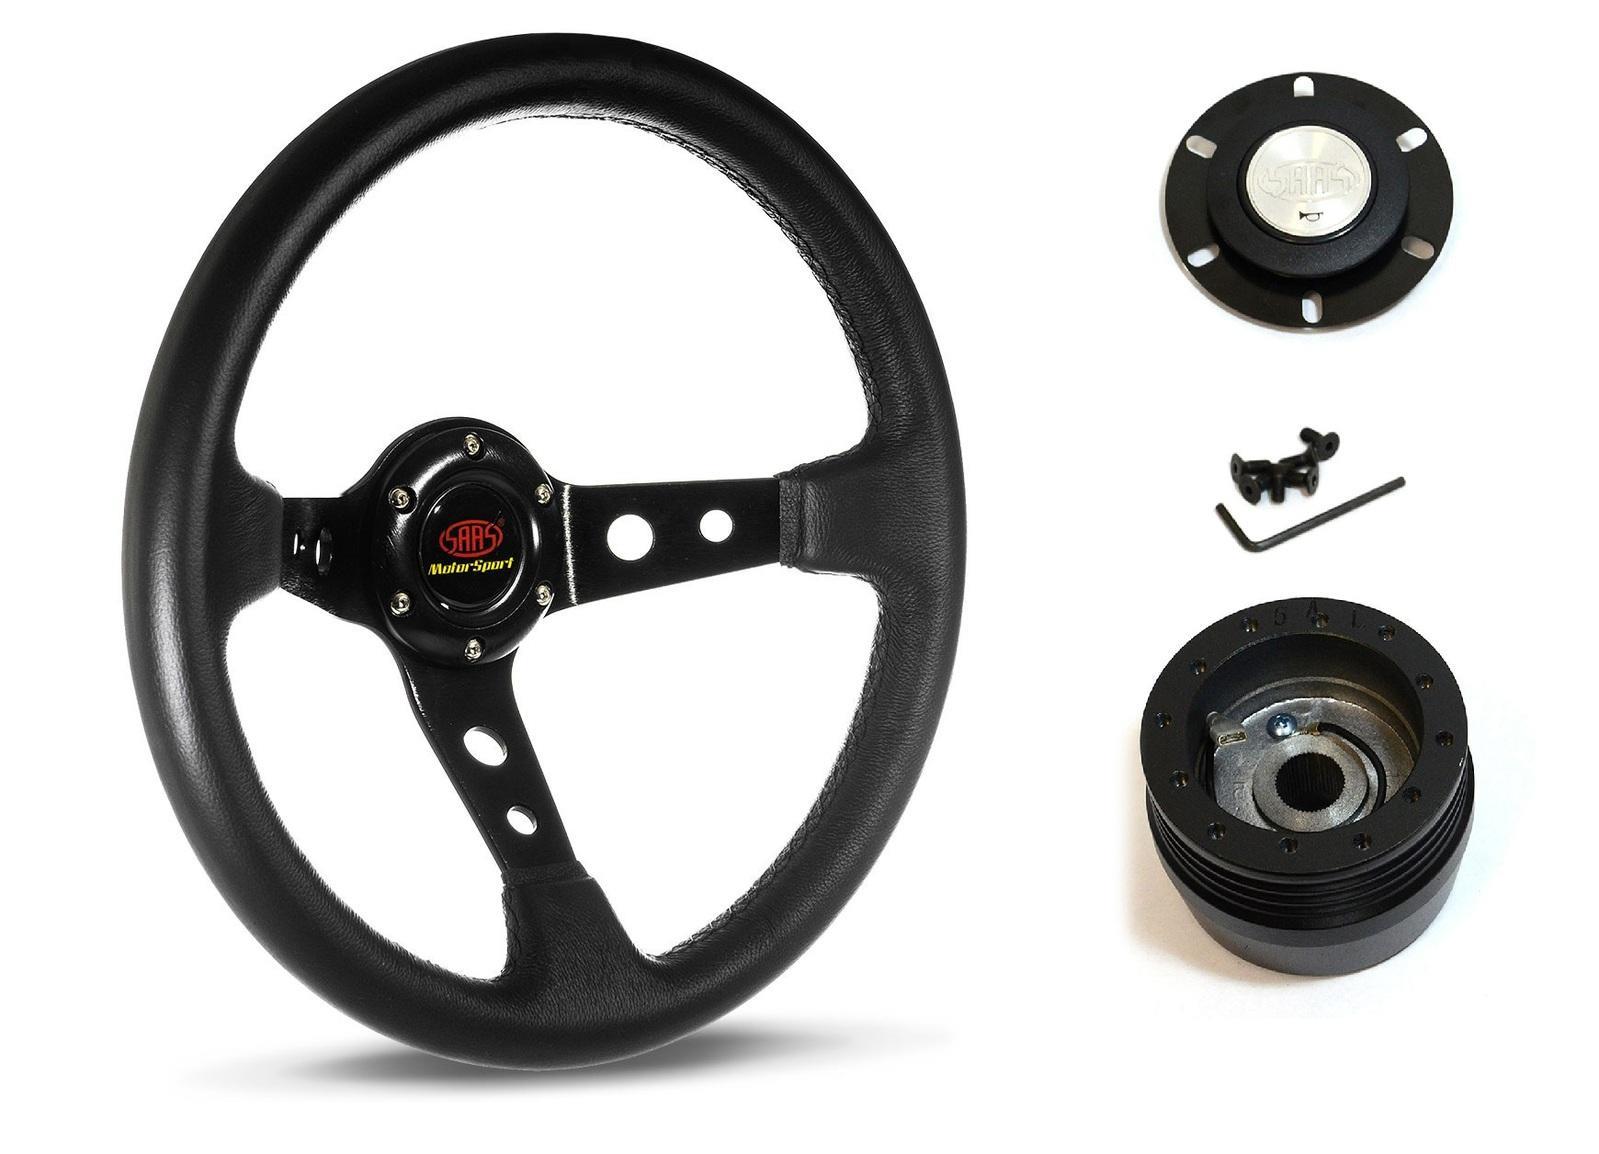 SAAS Steering Wheel Leather 14" ADR GT Deep Dish Black With Holes SWGT3 and SAAS boss kit for Nissan Patrol GQ 1988-1997